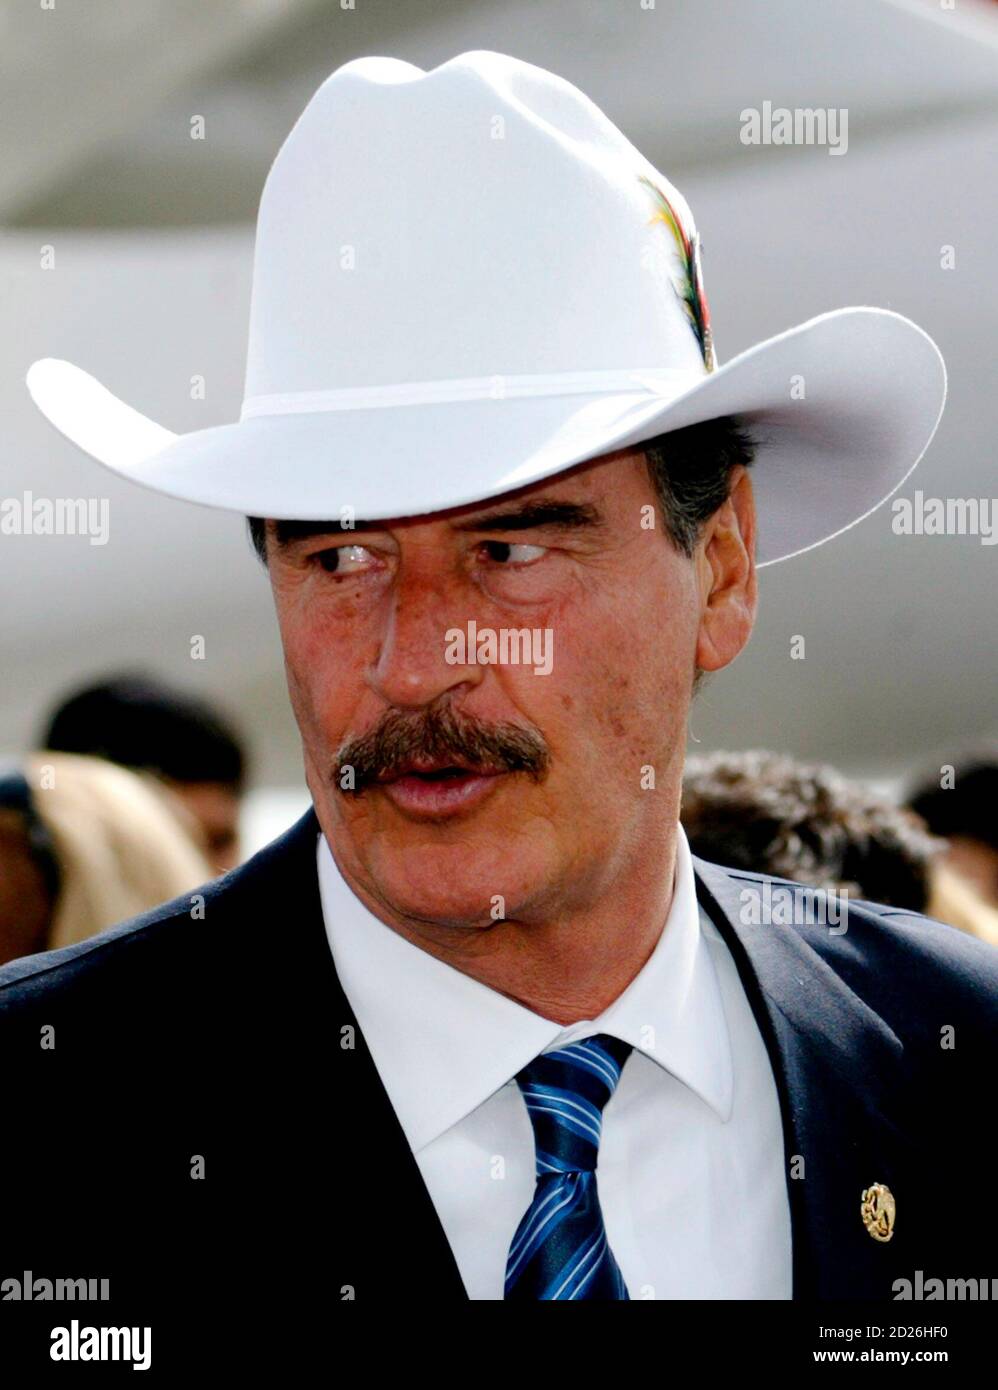 Mexican President Vicente Fox Quesada wears a white Stetson hat given to  him and his wife,